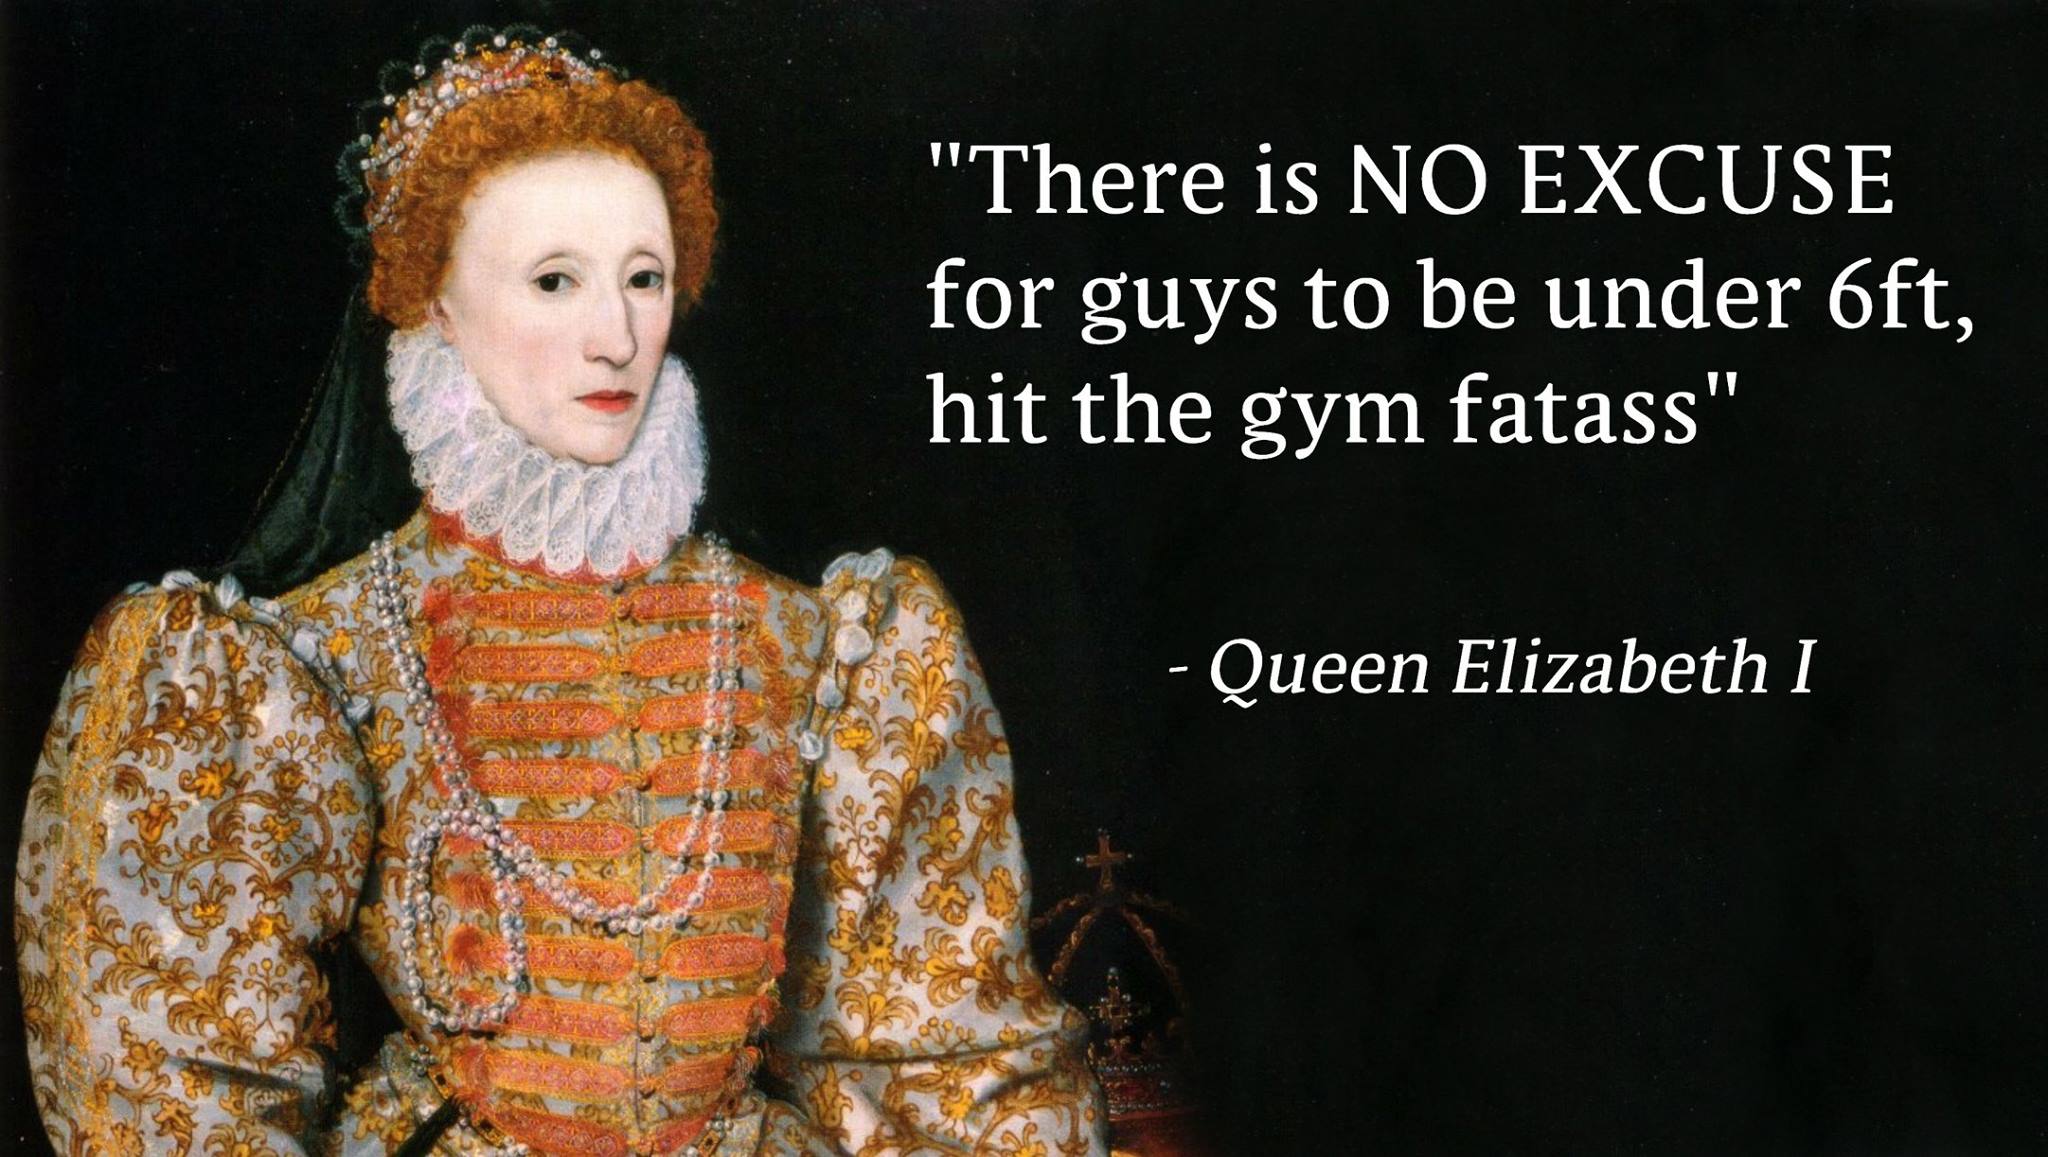 darnley portrait - "There is No Excuse for guys to be under 6ft, hit the gym fatass" Queen Elizabeth I Pianos